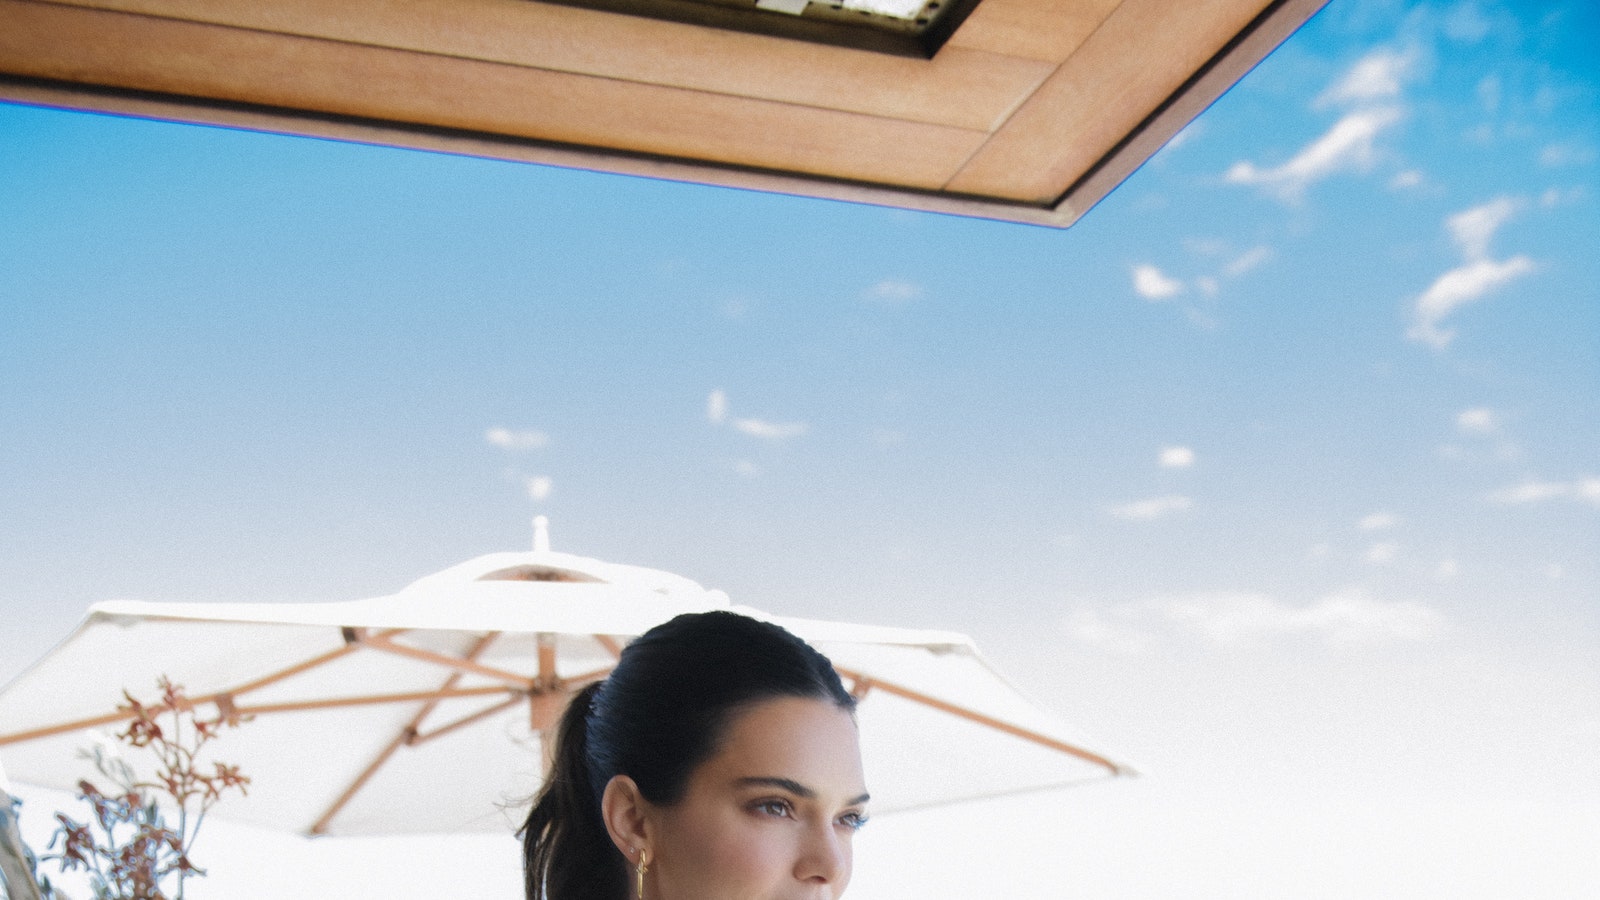 Over in Malibu, Kendall Jenner Hosted a Tequila Tasting for Vogue100